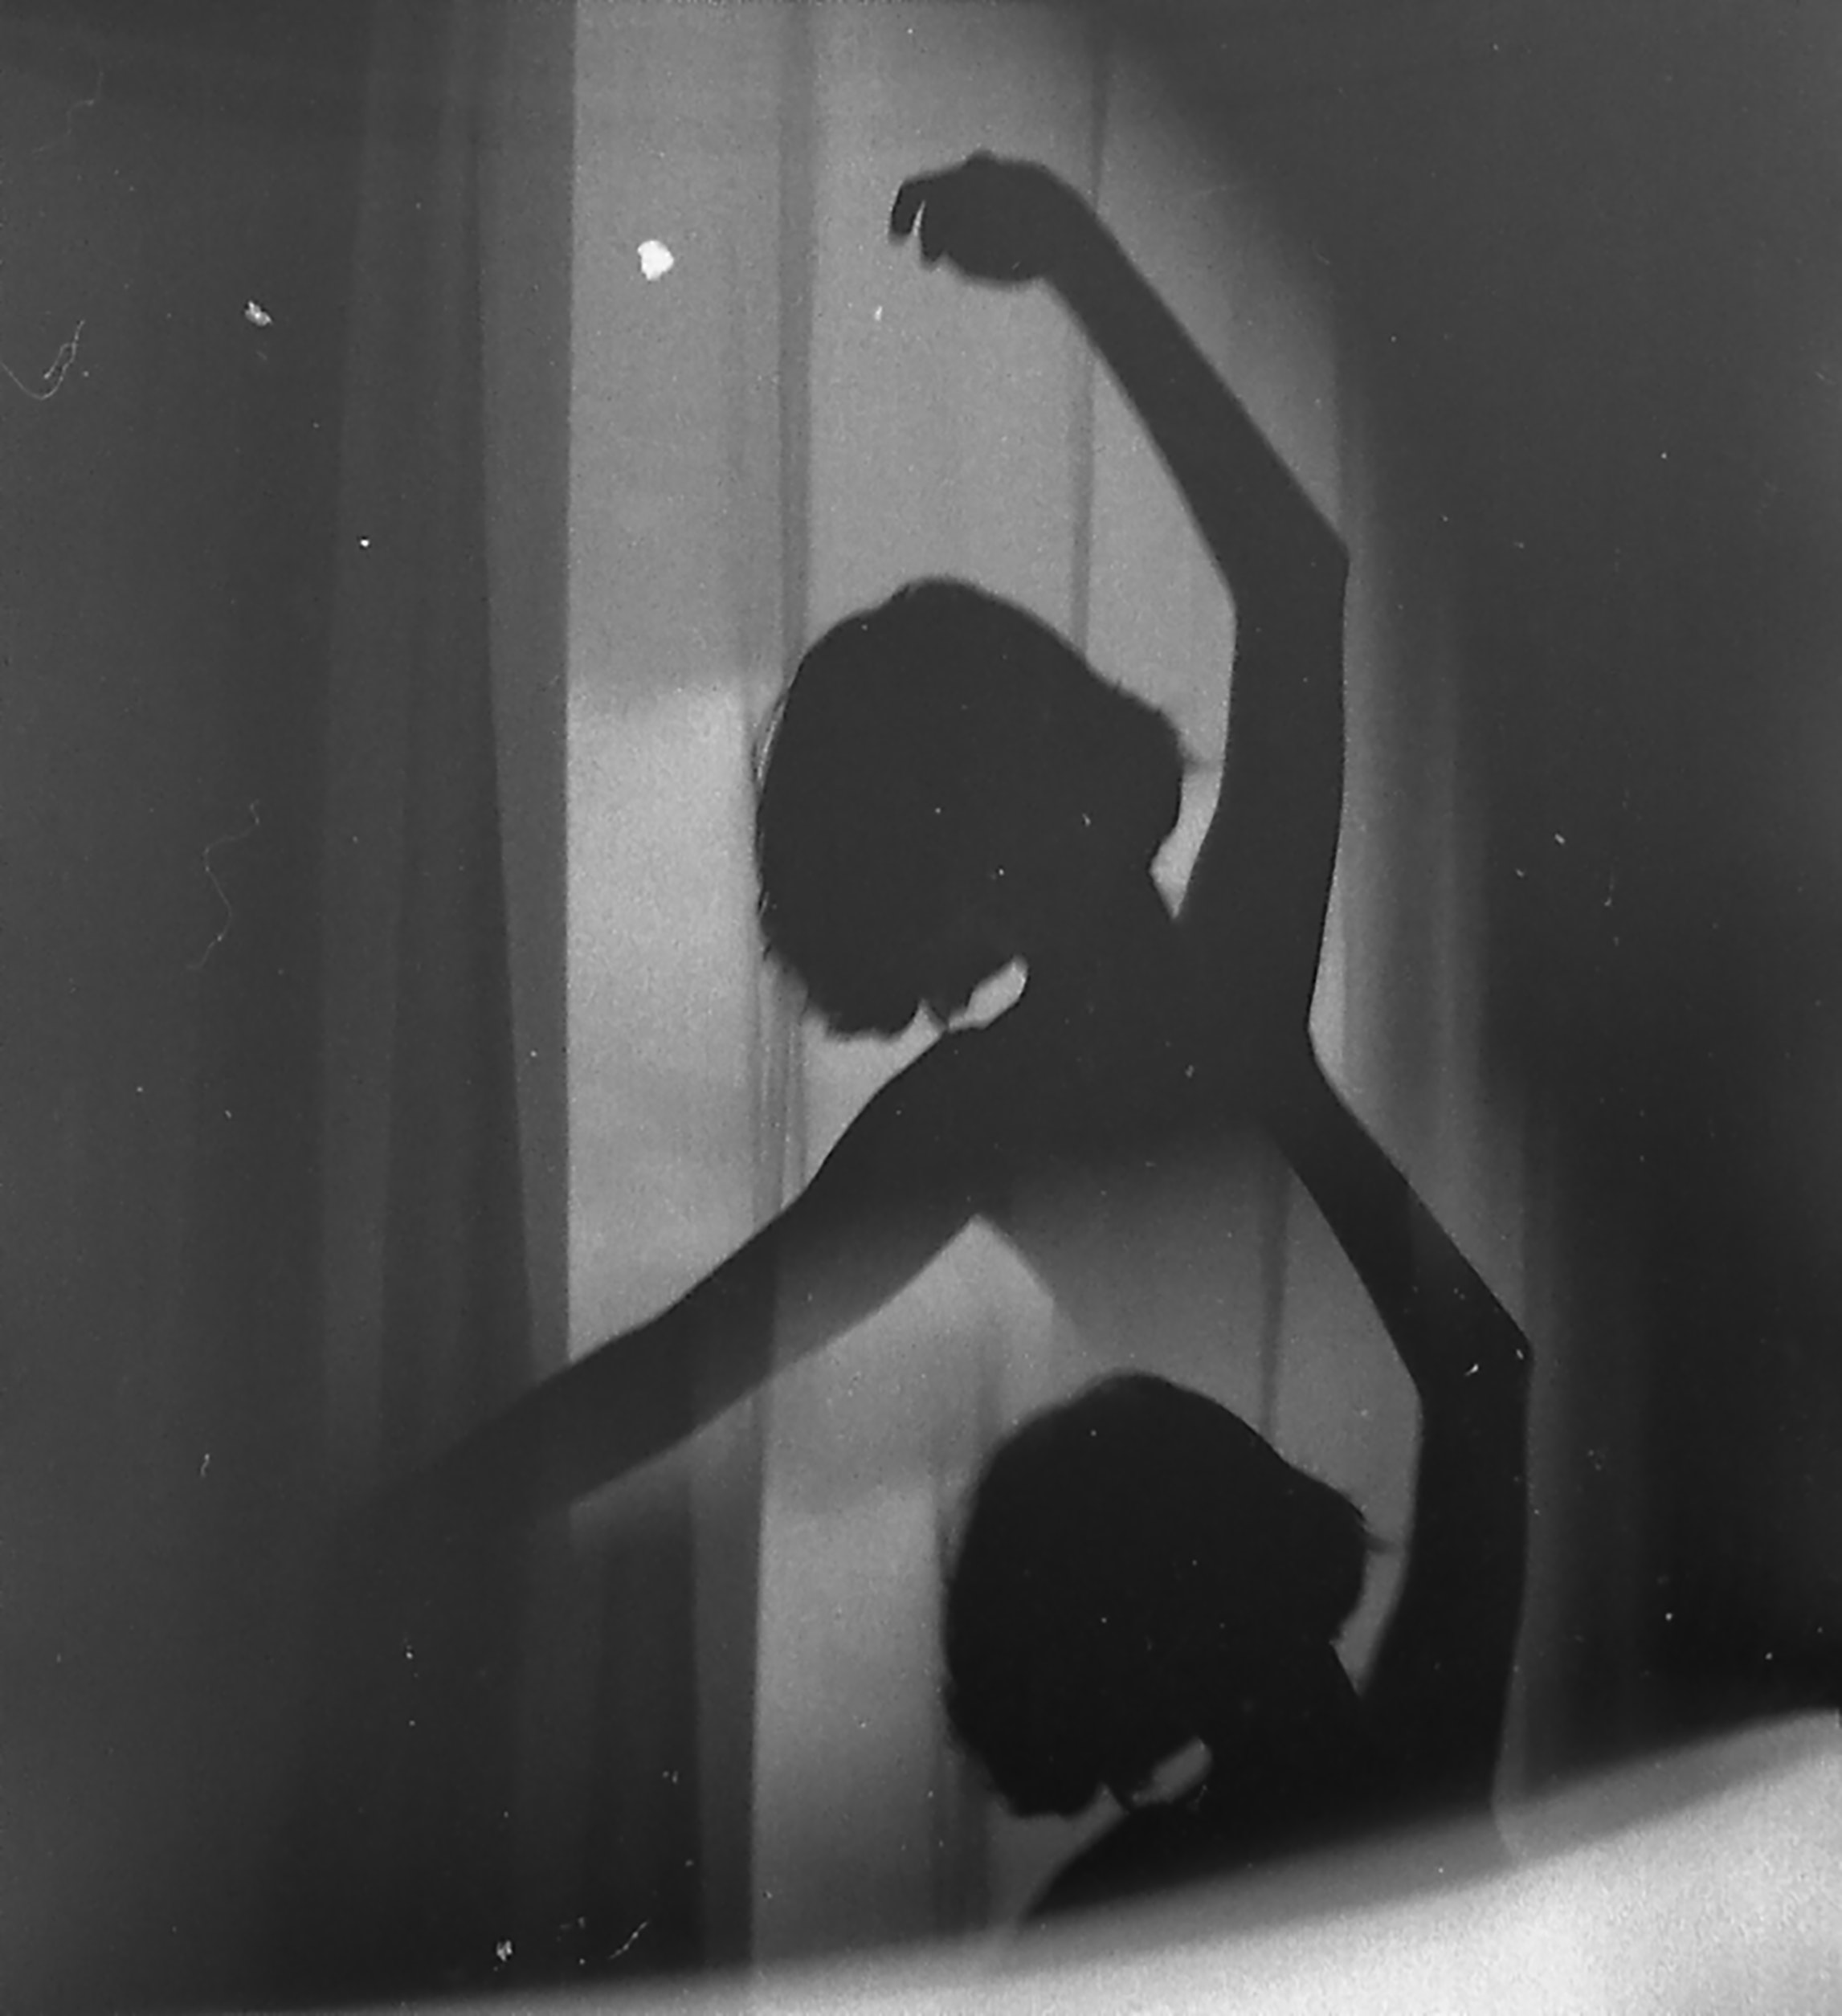 A woman is dancing in front of the window - Black quotes